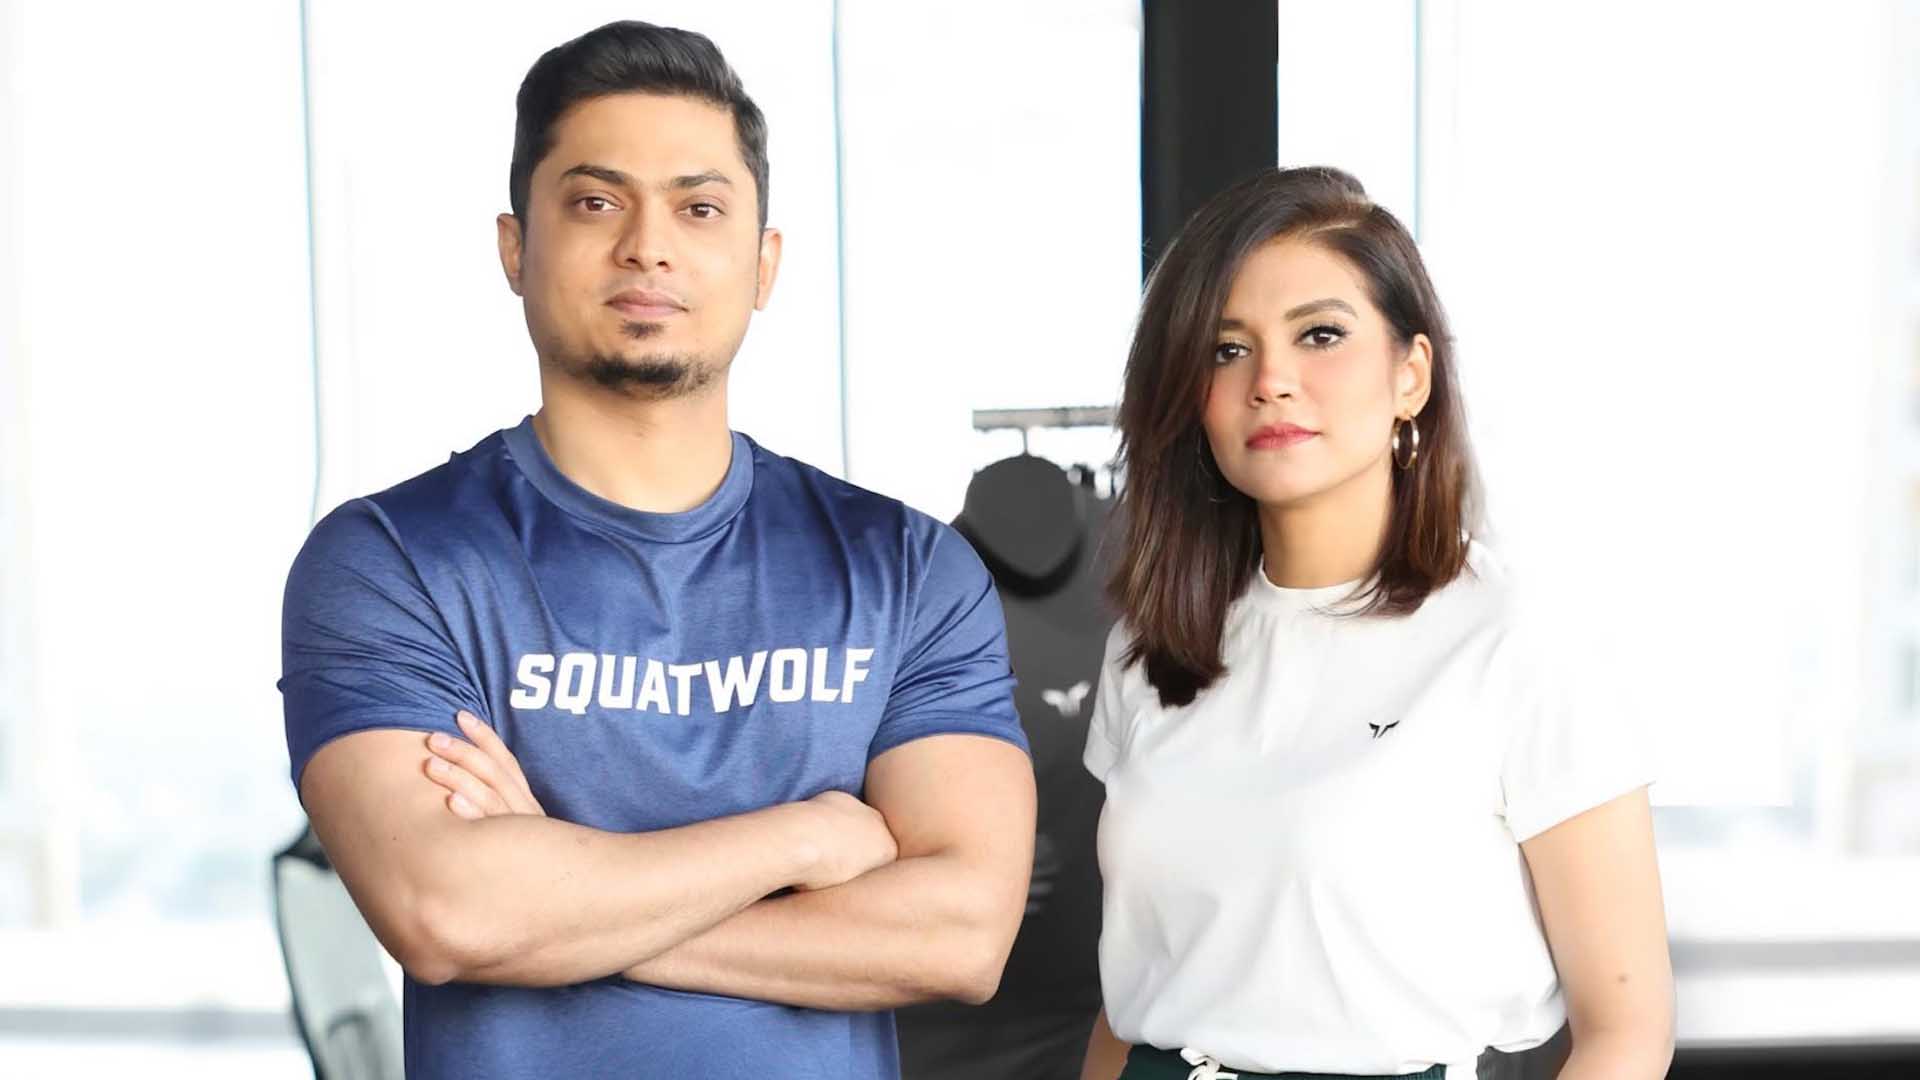 ASCA Capital Announces Minority Investment in SQUATWOLF to Support The Growth of The Successful Premium Gymwear Brand